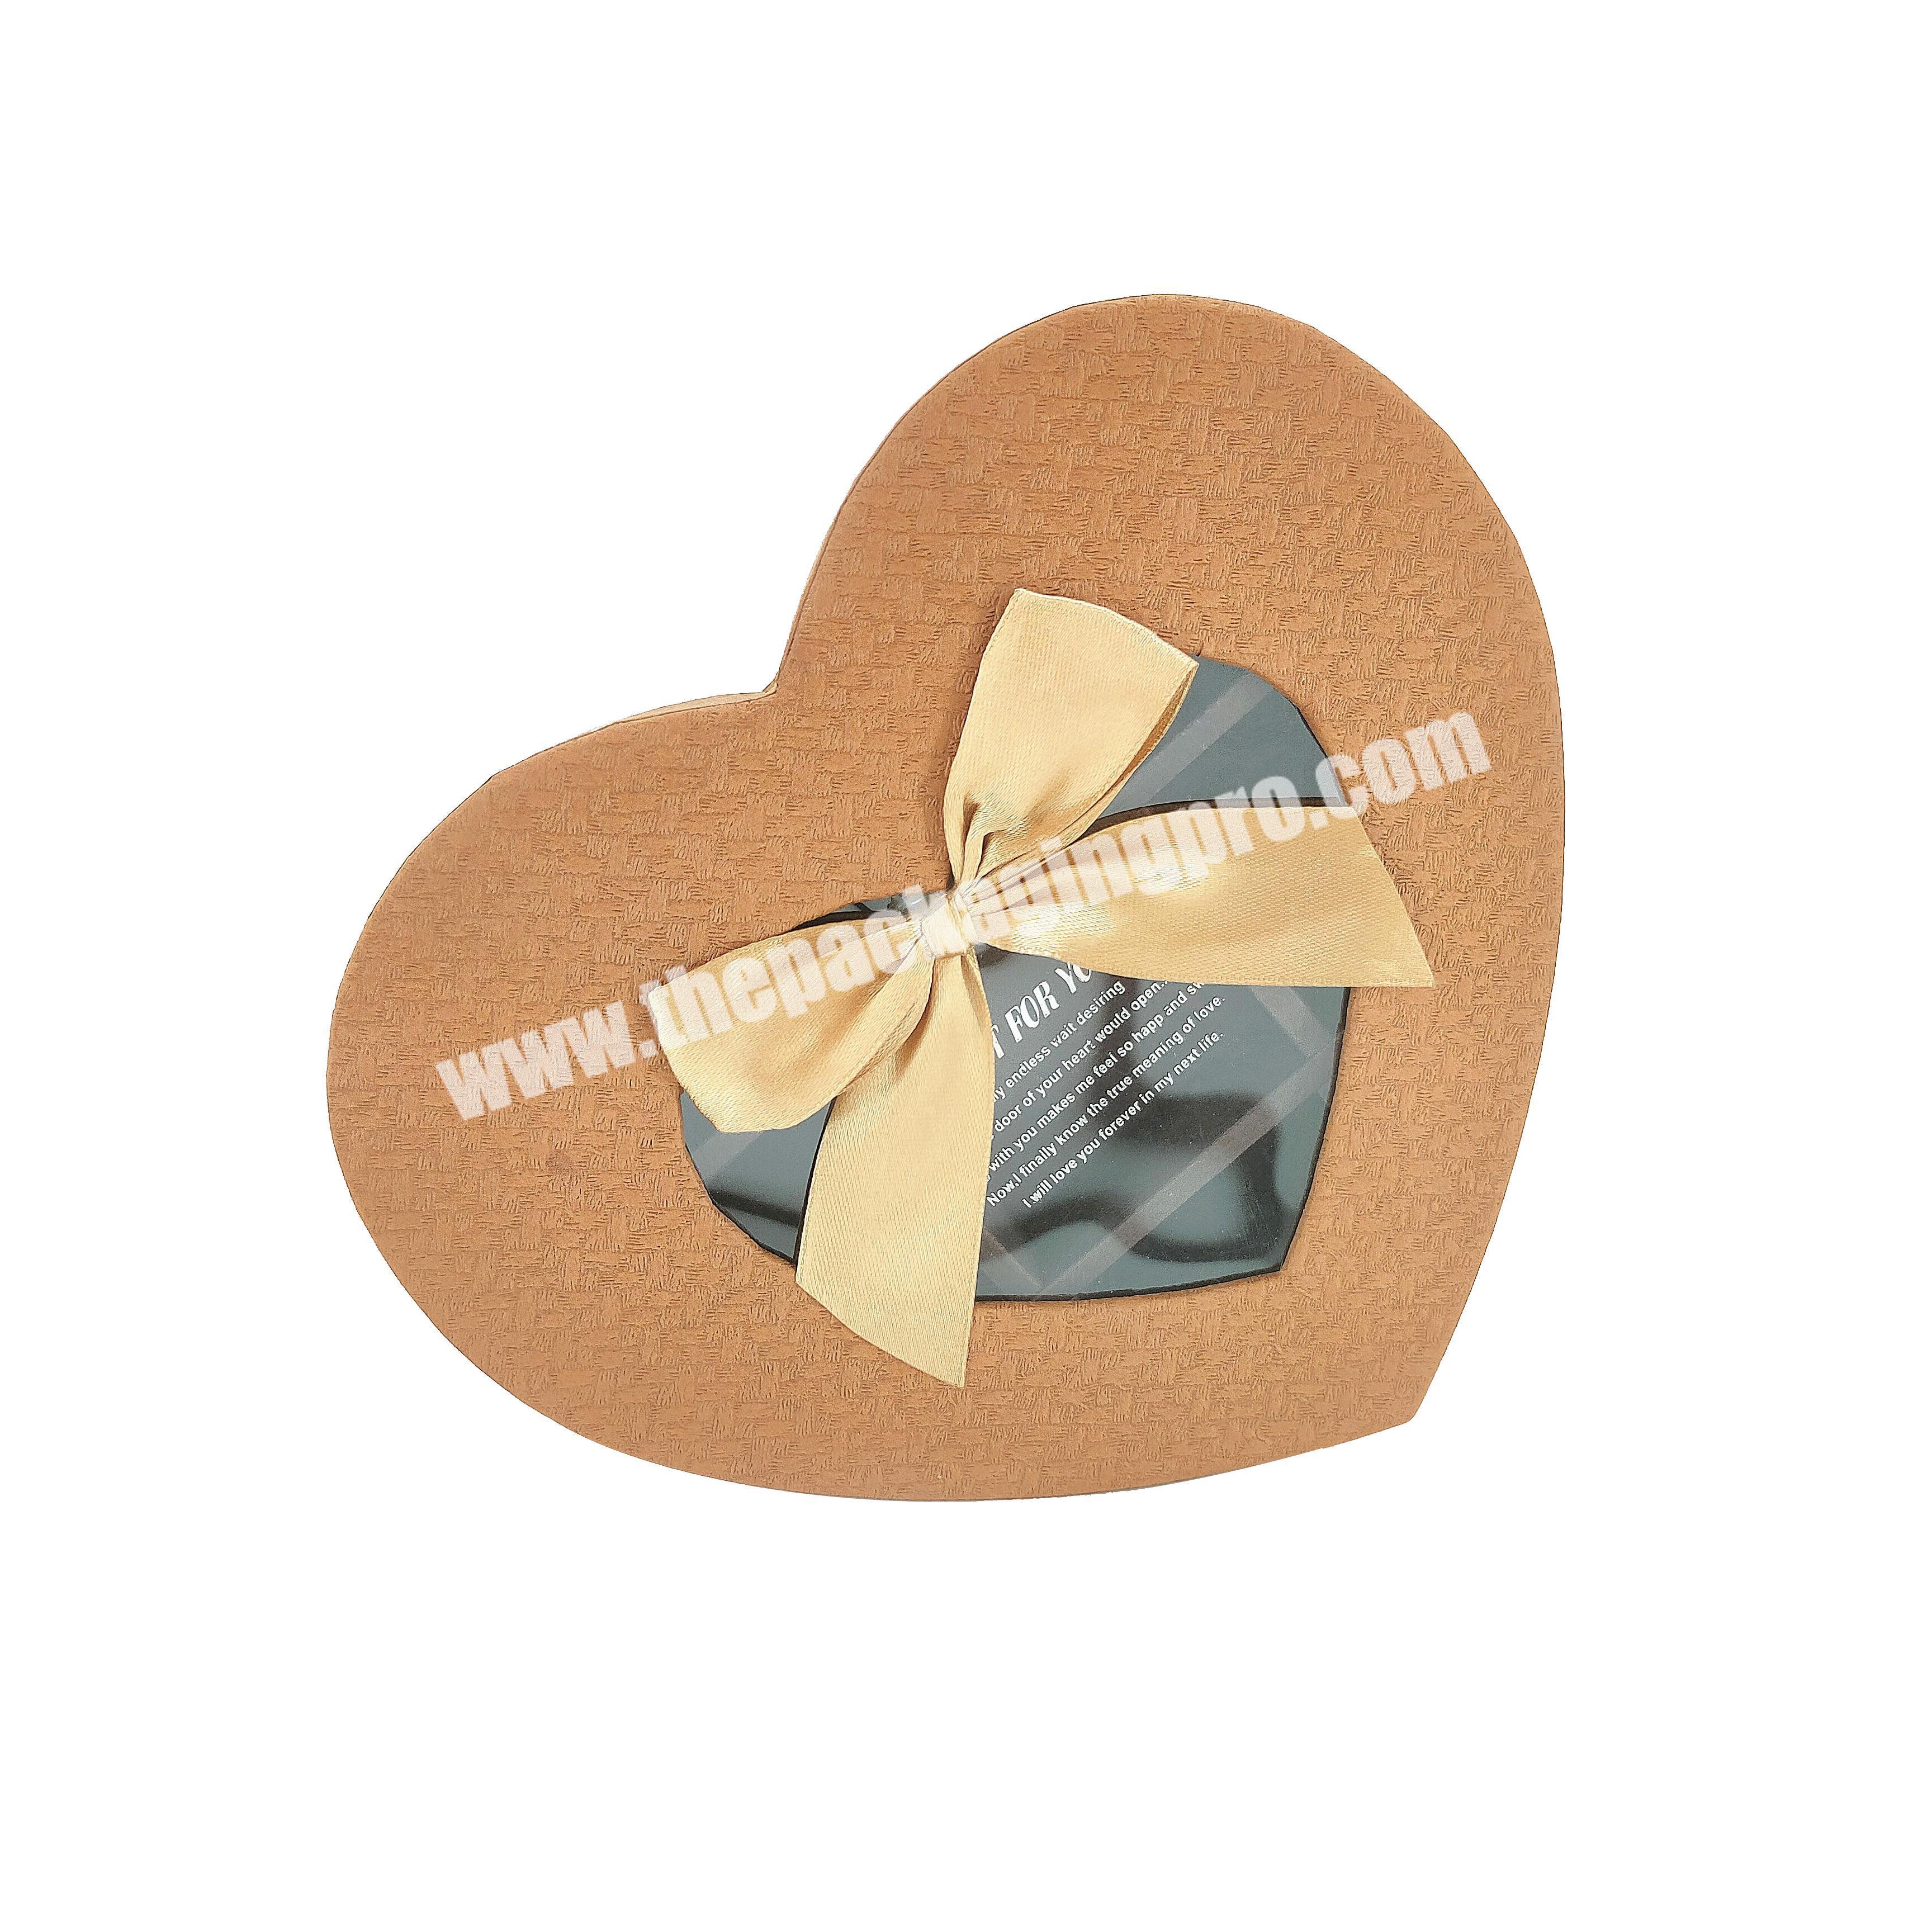 high quality heart shape factory directly chocolate kraft paper box packaging stylish design